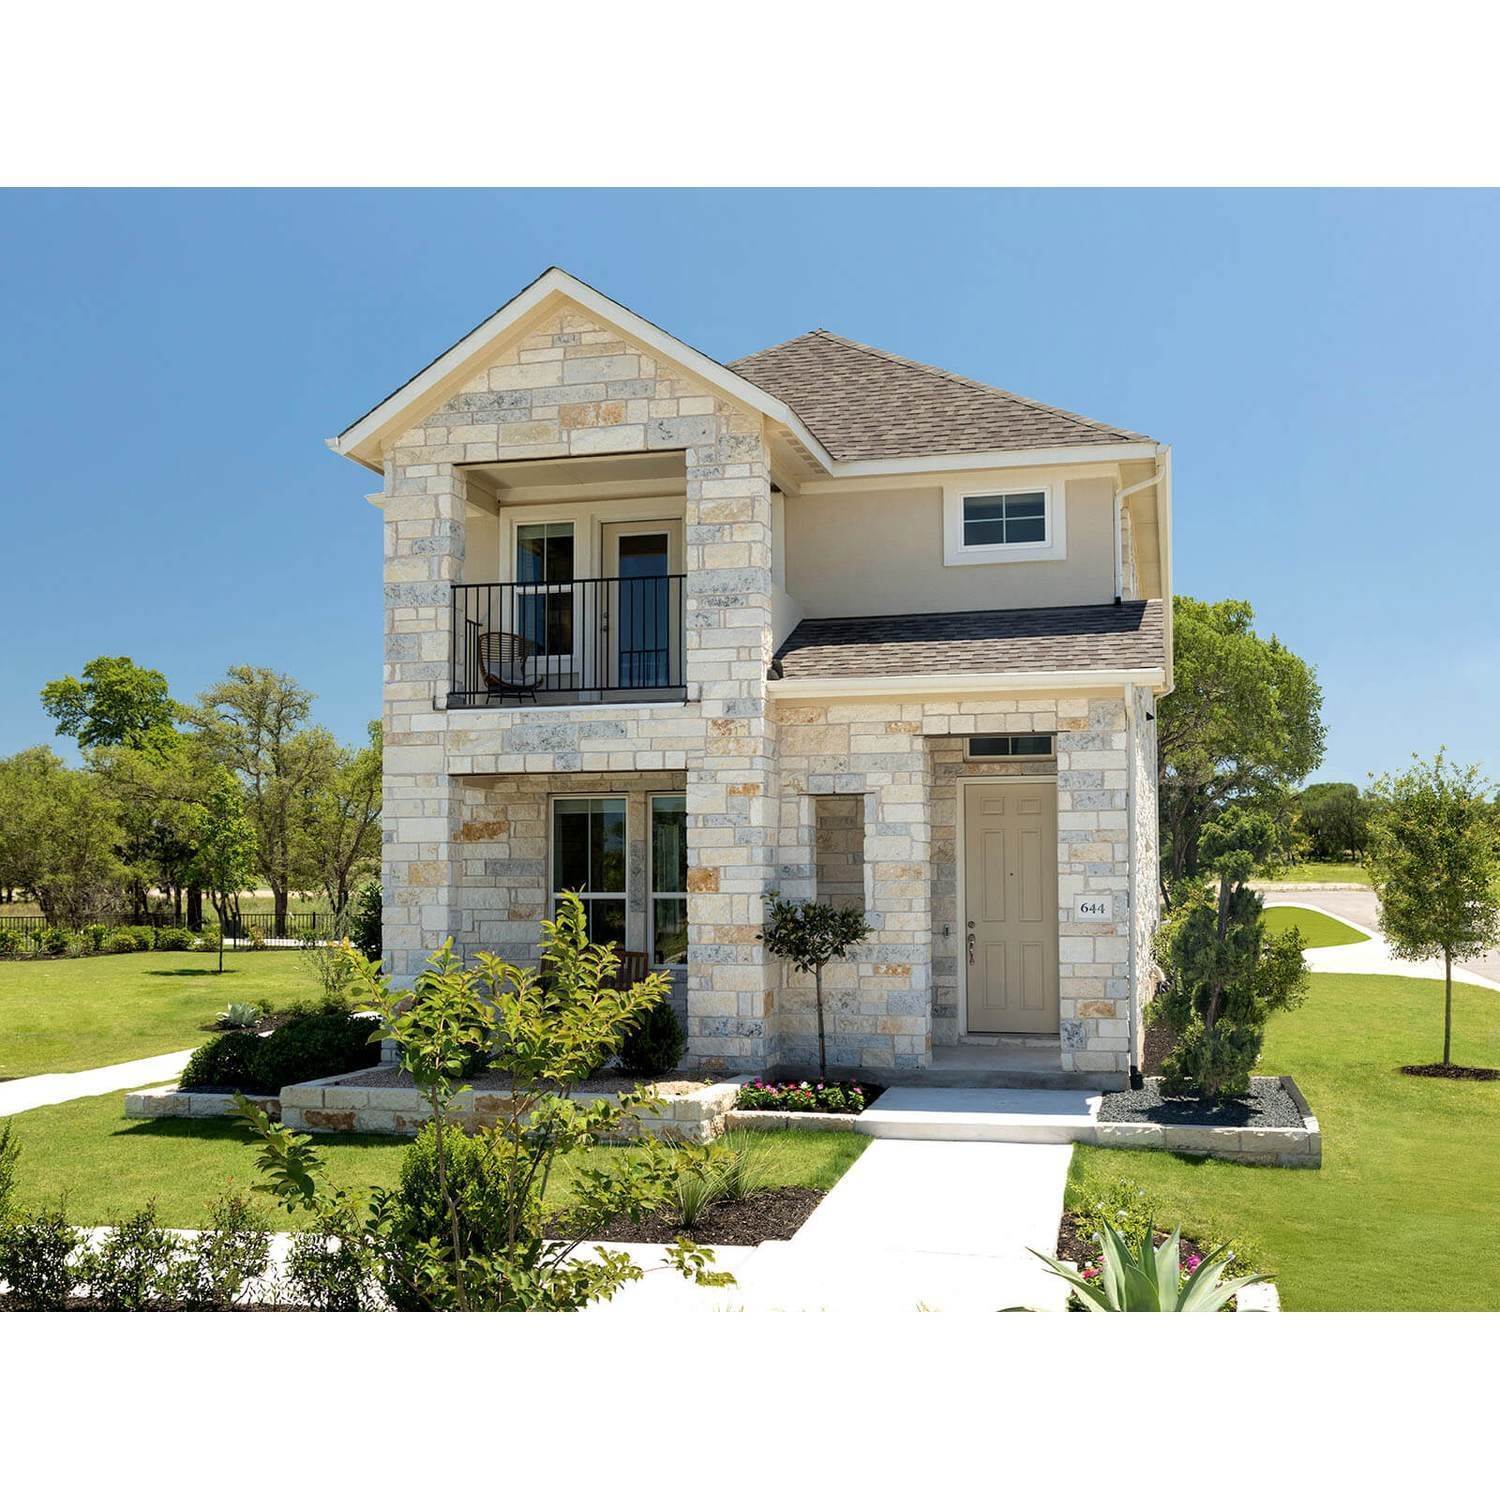 3. 644 Lone Peak Way, Dripping Springs, TX 78620에 Big Sky Ranch - Heritage Collection 건물